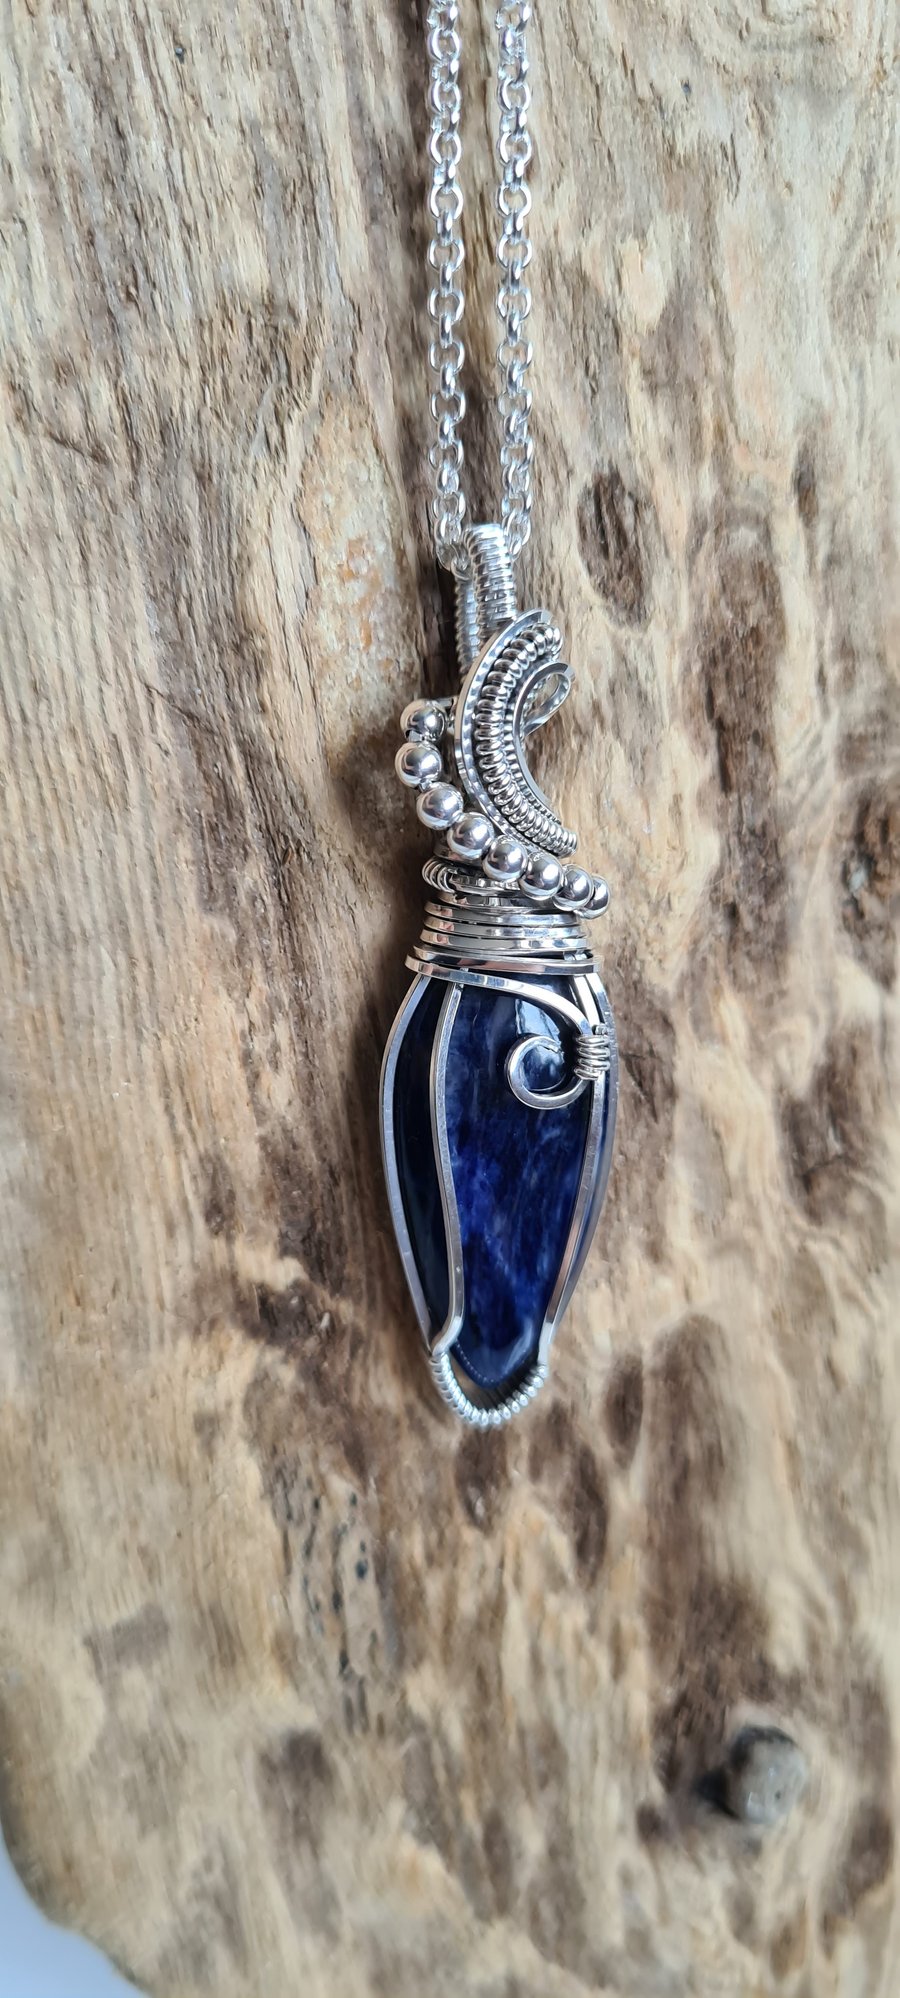 Handmade Elegant 925 Silver & Sodalite Necklace Pendant with Silver Chain